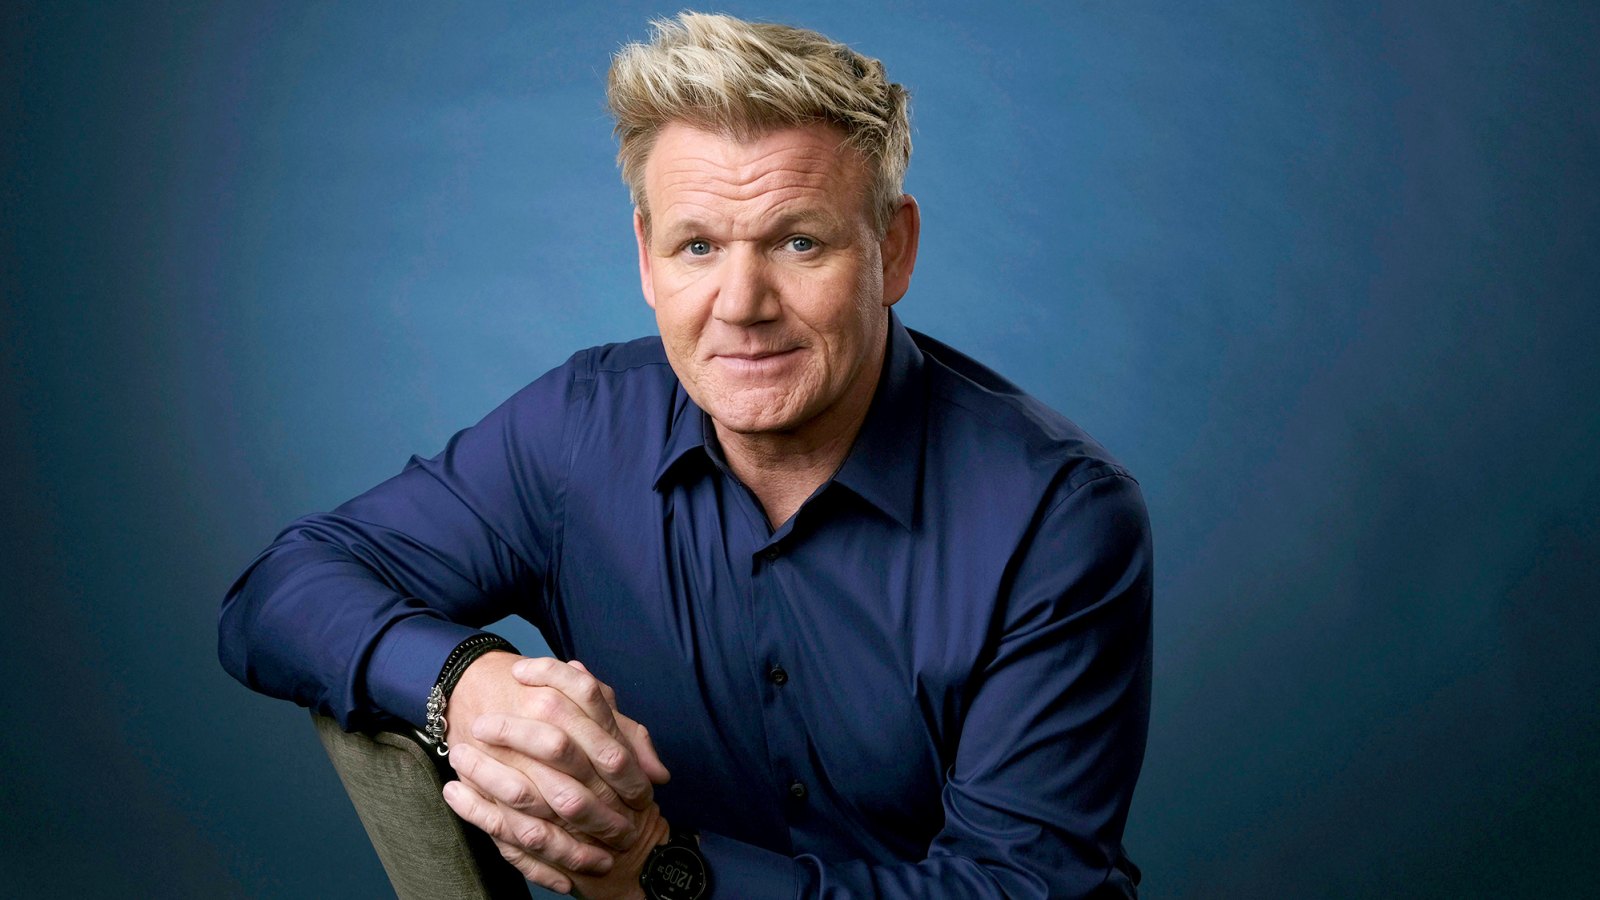 Gordon Ramsay Shares Hand Washing Tutorial and Fans Are Loving It